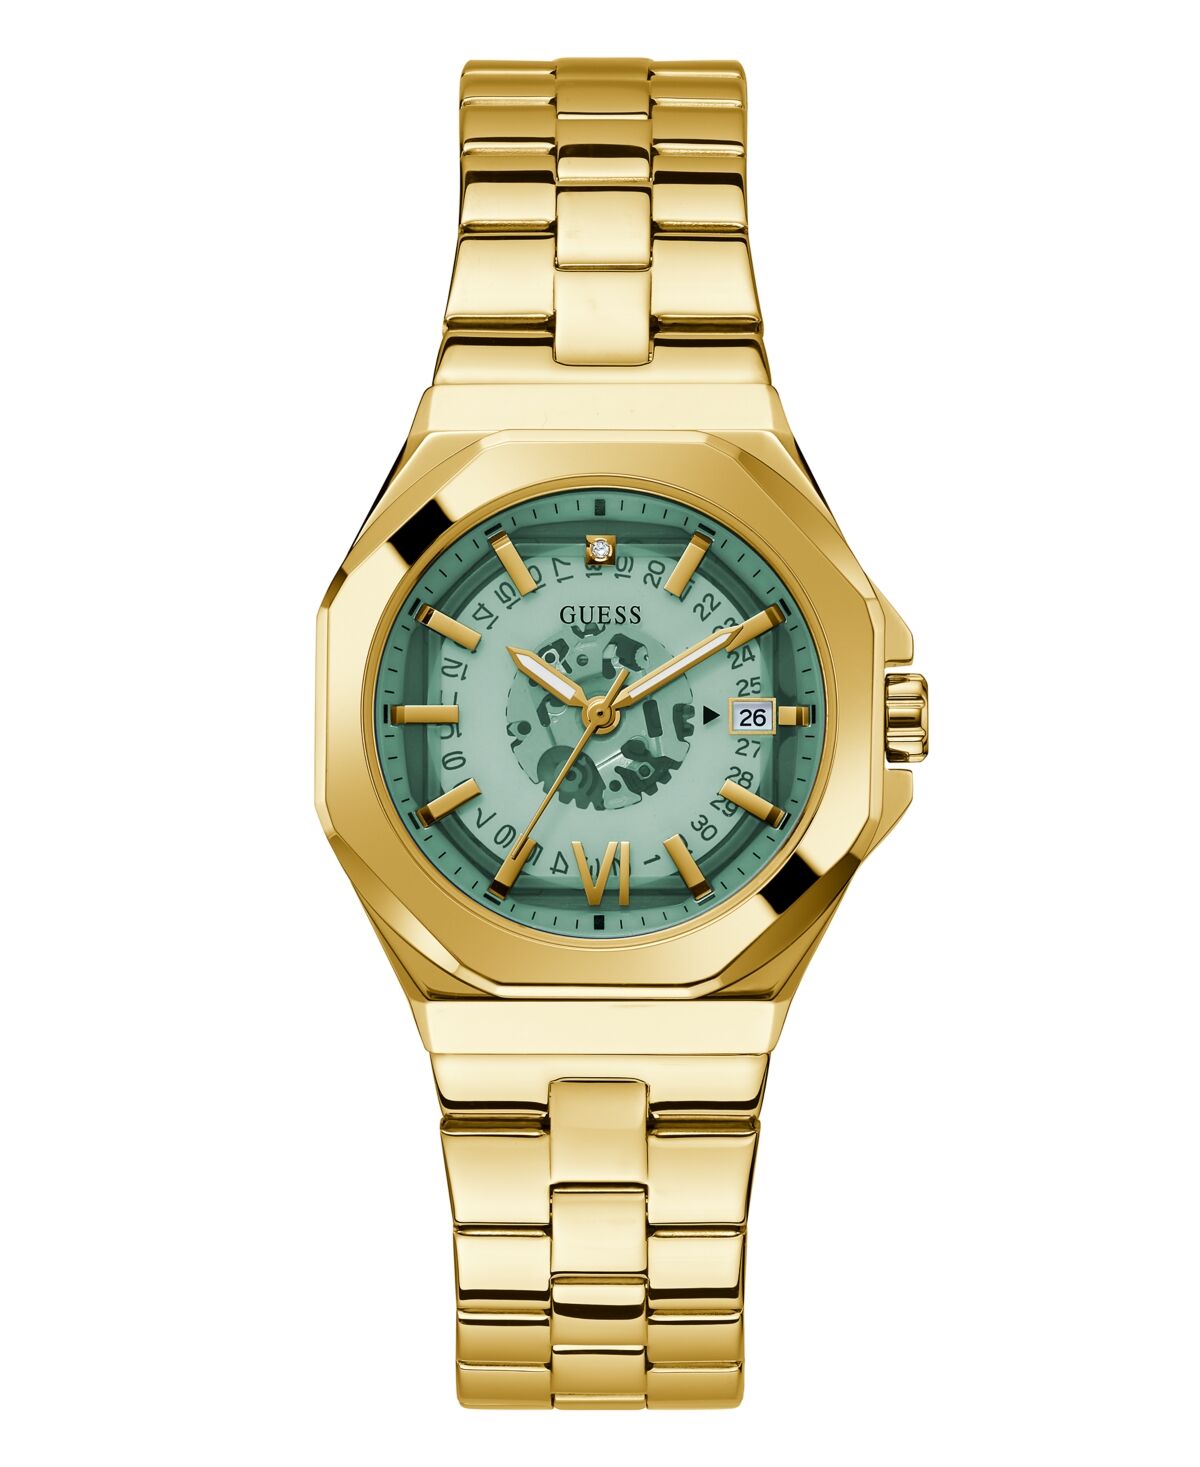 Guess Women's Date Gold-Tone Stainless Steel Watch 34mm - Gold-Tone